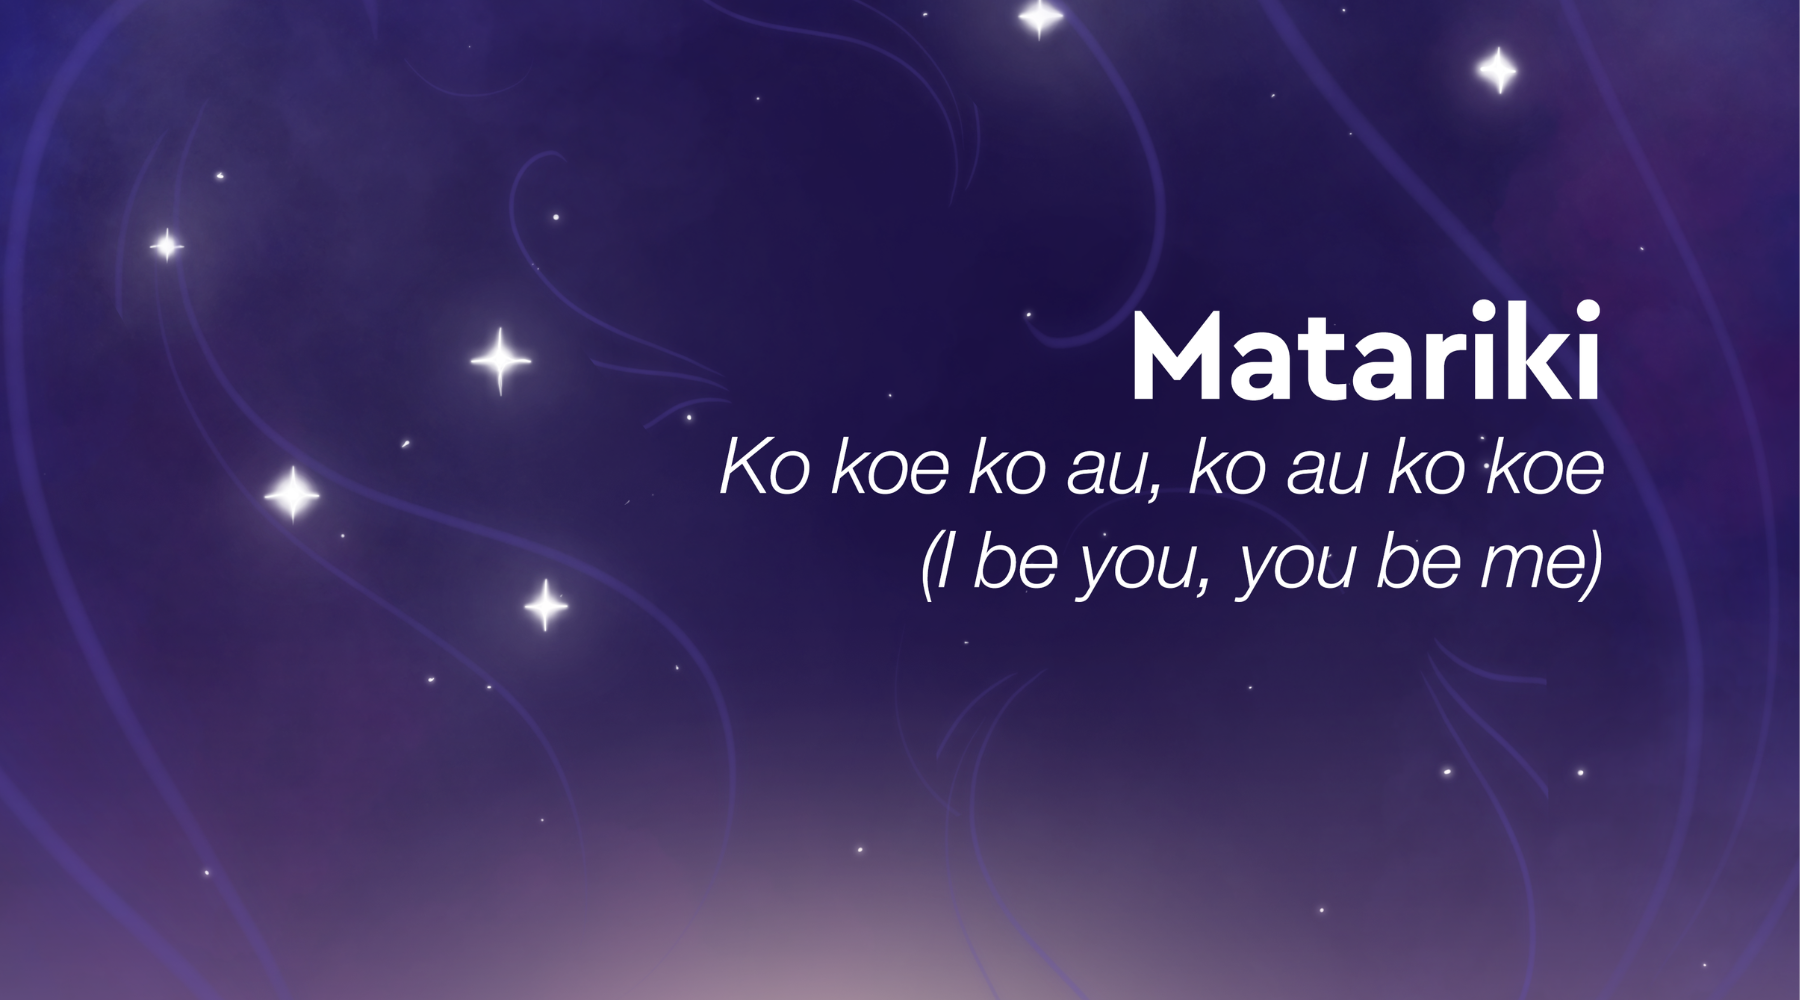 In 2023 we will celebrate Matariki in a cluster of stars and dreams that will connect not only our local and national specialist and mainstream schools in Aotearoa New Zealand, but also other schools and disability-led dance organizations and companies around the world!

